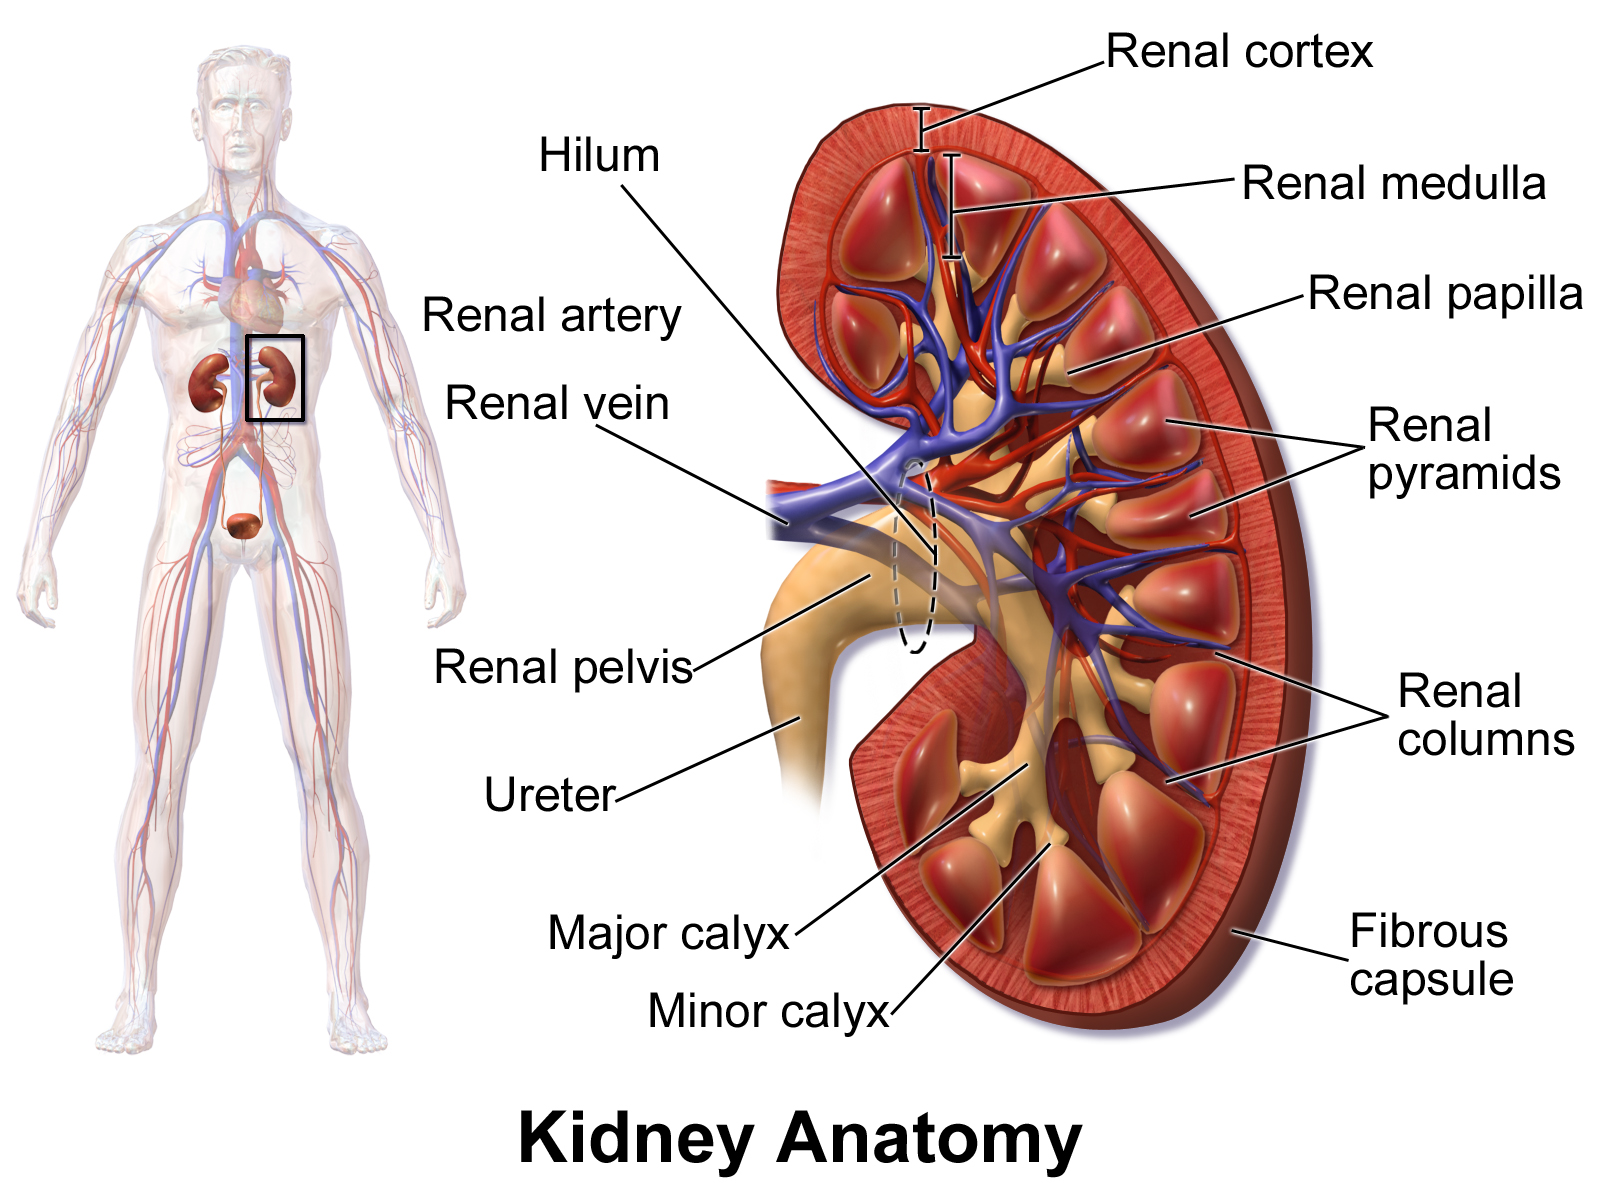 The kidneys lie in the retroperitoneal space behind the abdomen, and act to filter blood to create urine.